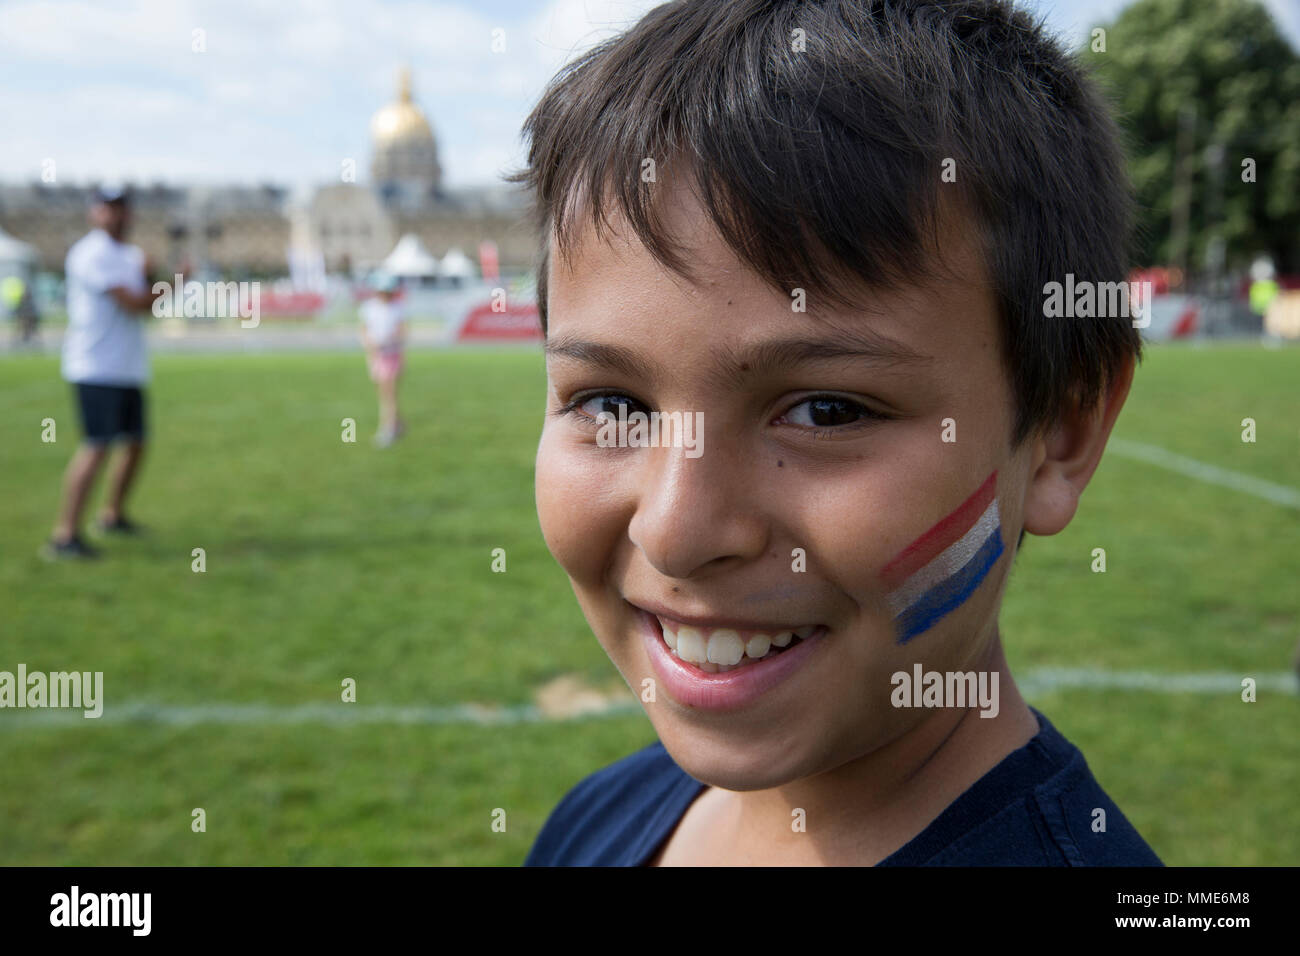 Smiling 11-year-old boy with a French flag tatoo. Paris, France. Stock Photo